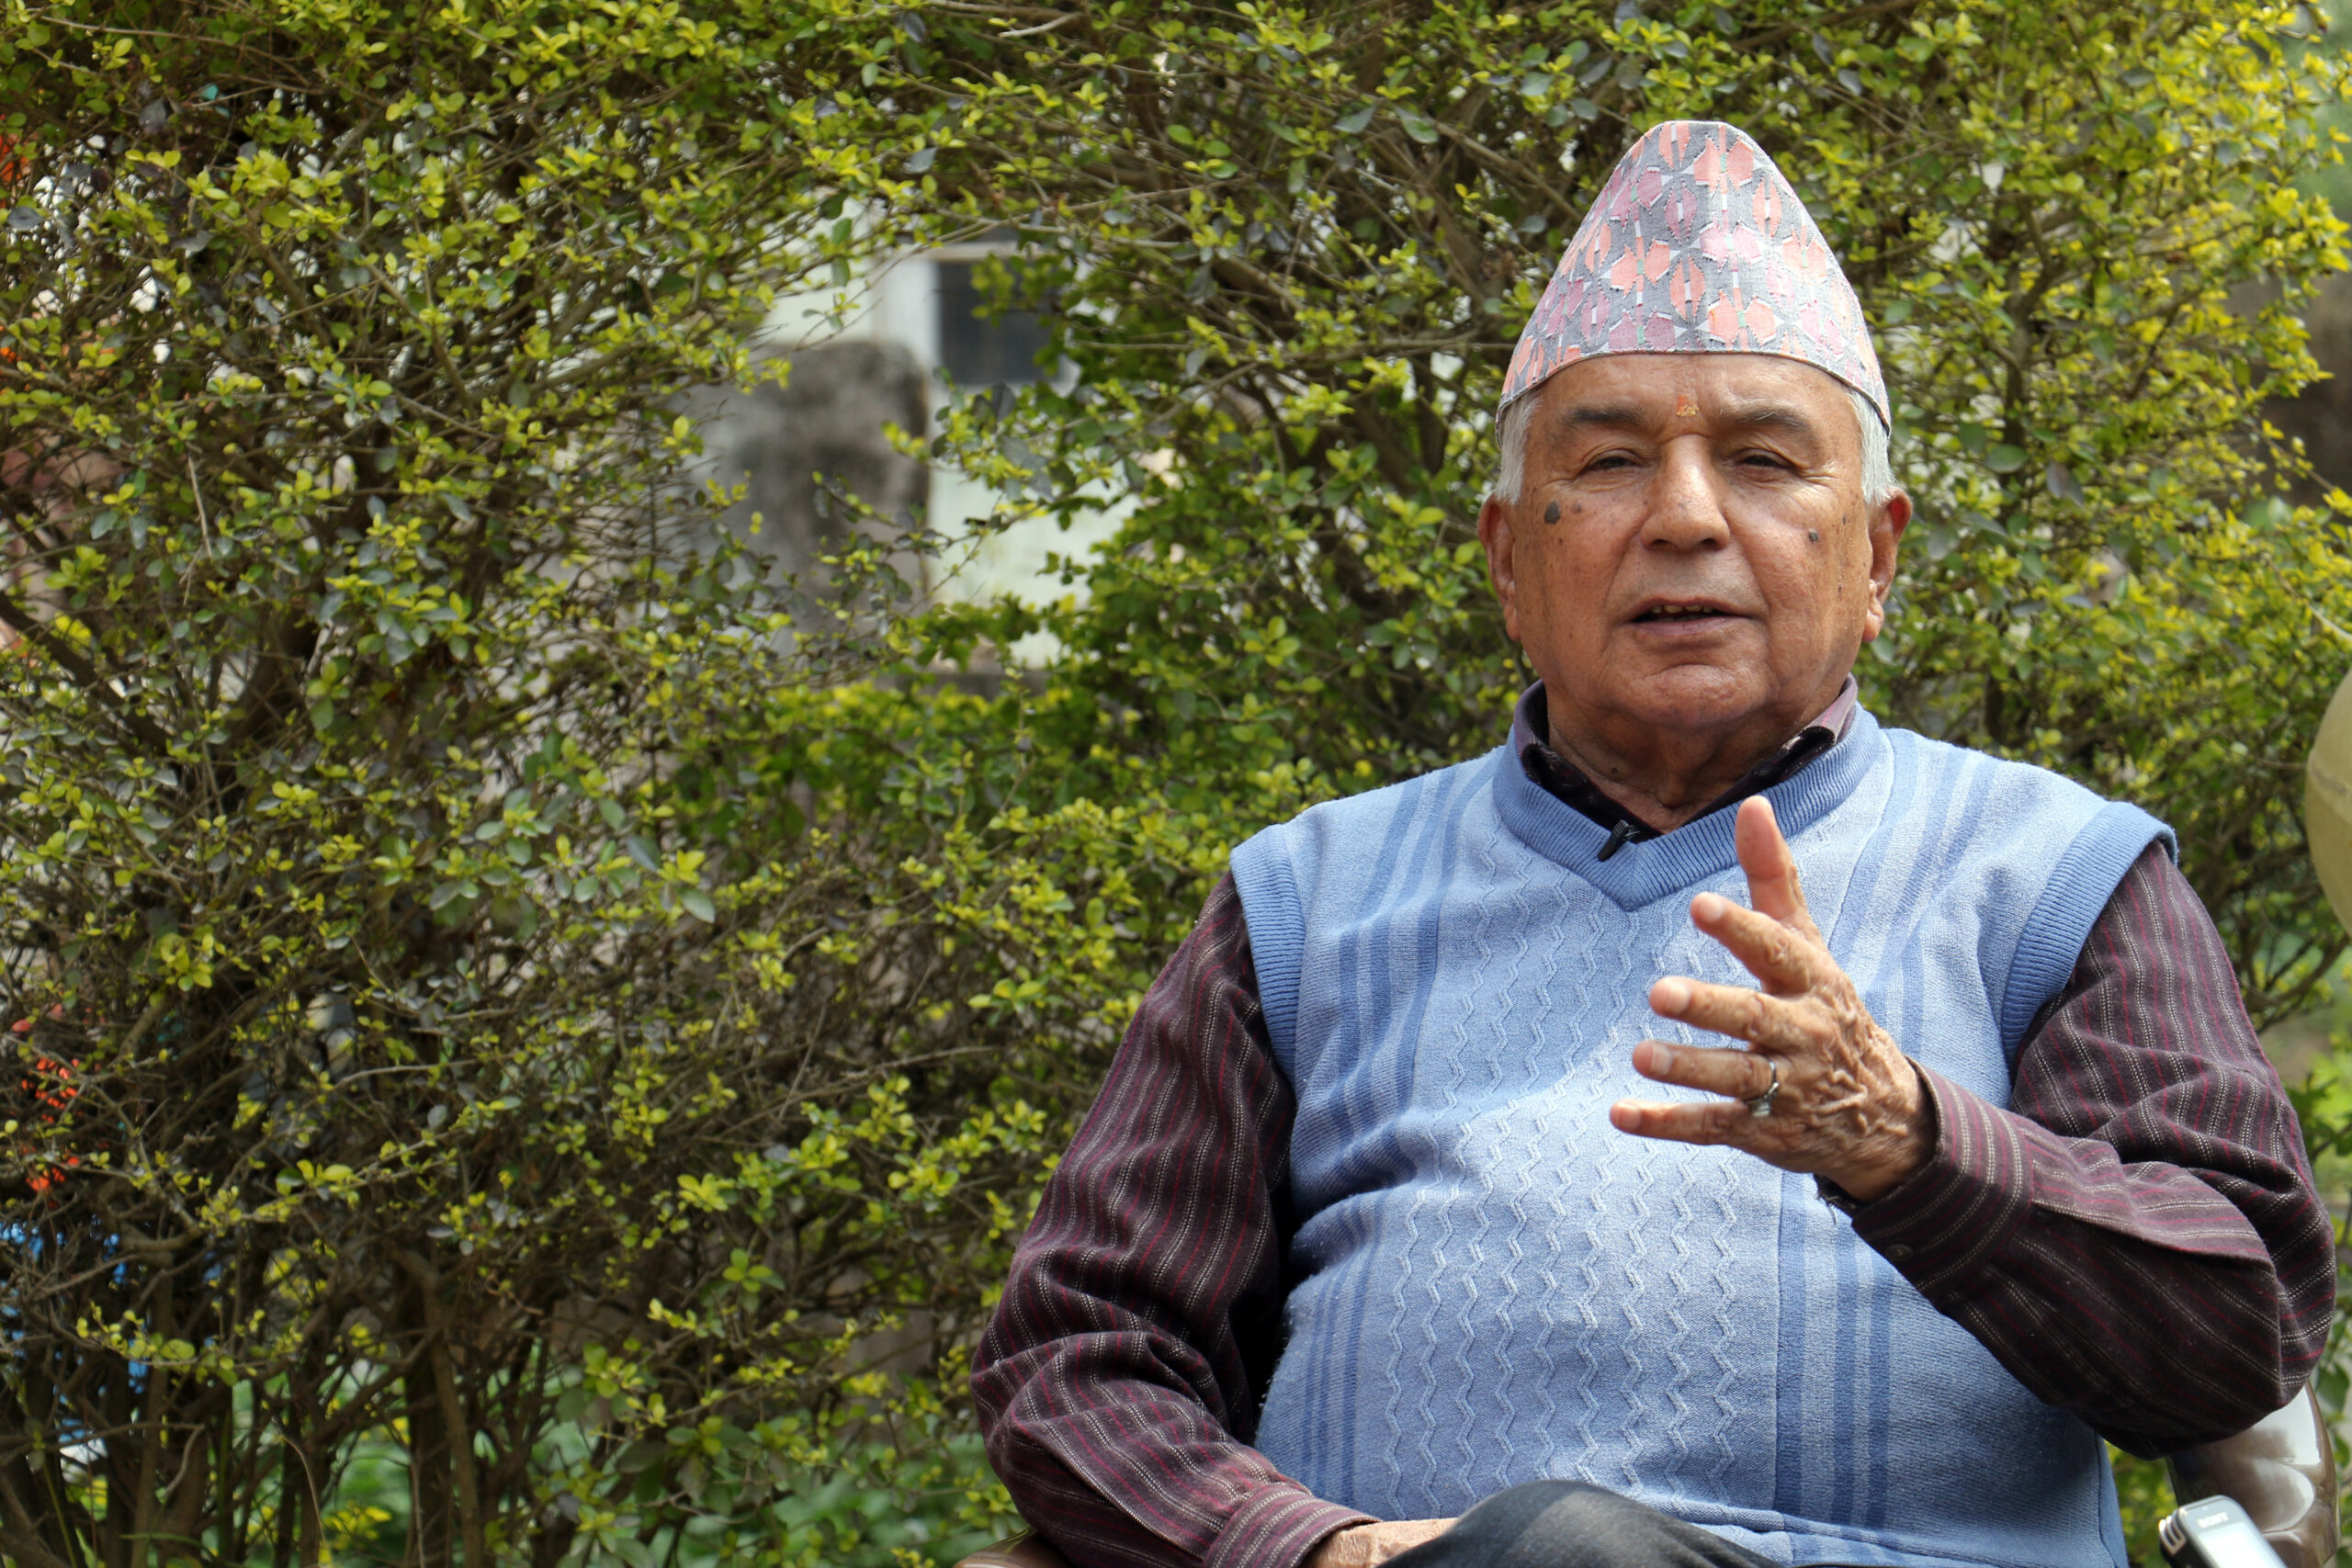 Safeguarding constitution and democracy will be my first duty: Ram Chandra Poudel